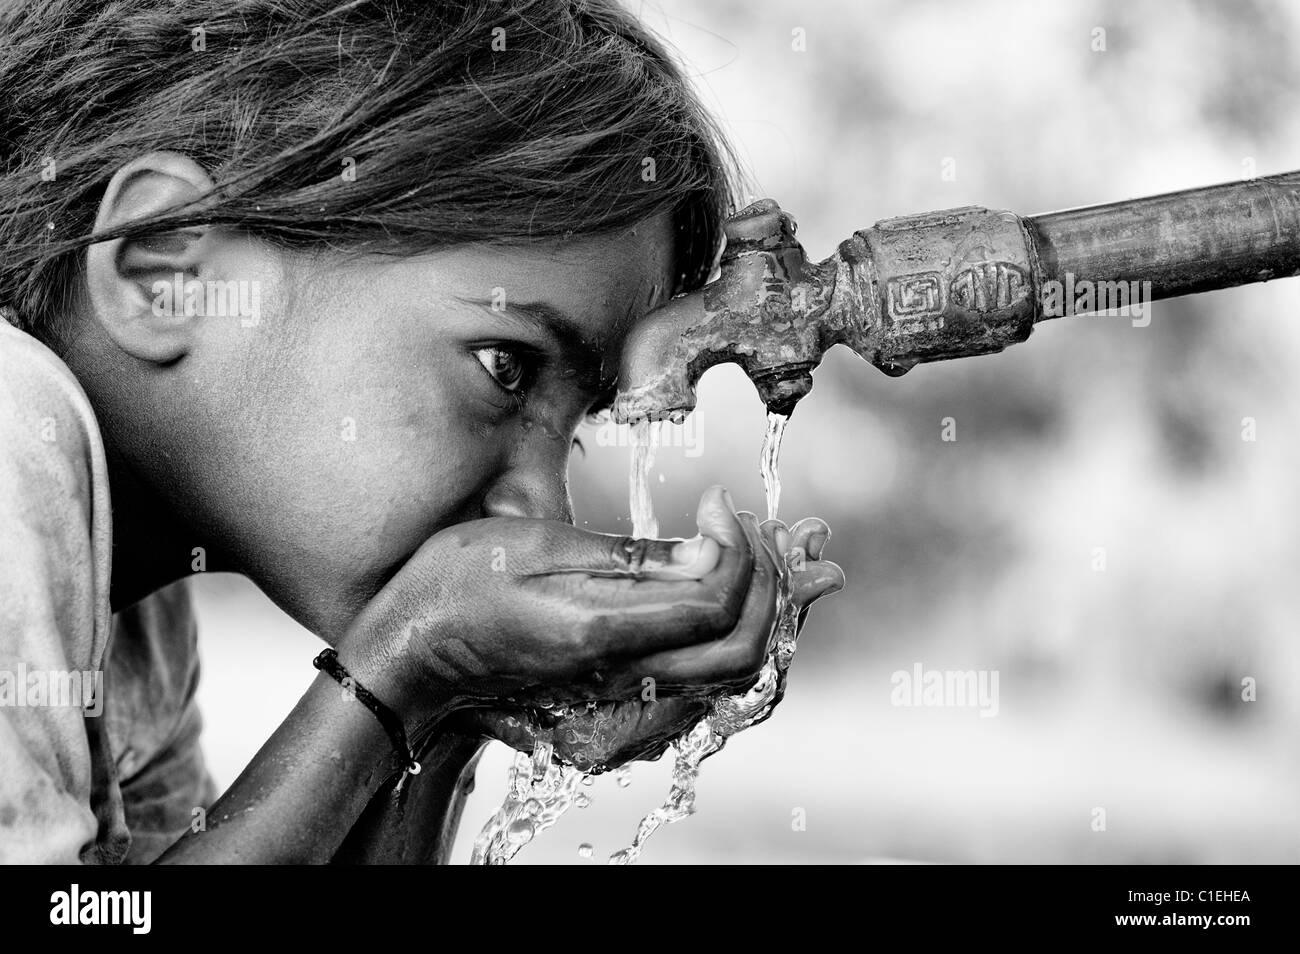 Young poor lower caste Indian girl drinking from a water tap. Andhra Pradesh, India. Monochrome Stock Photo